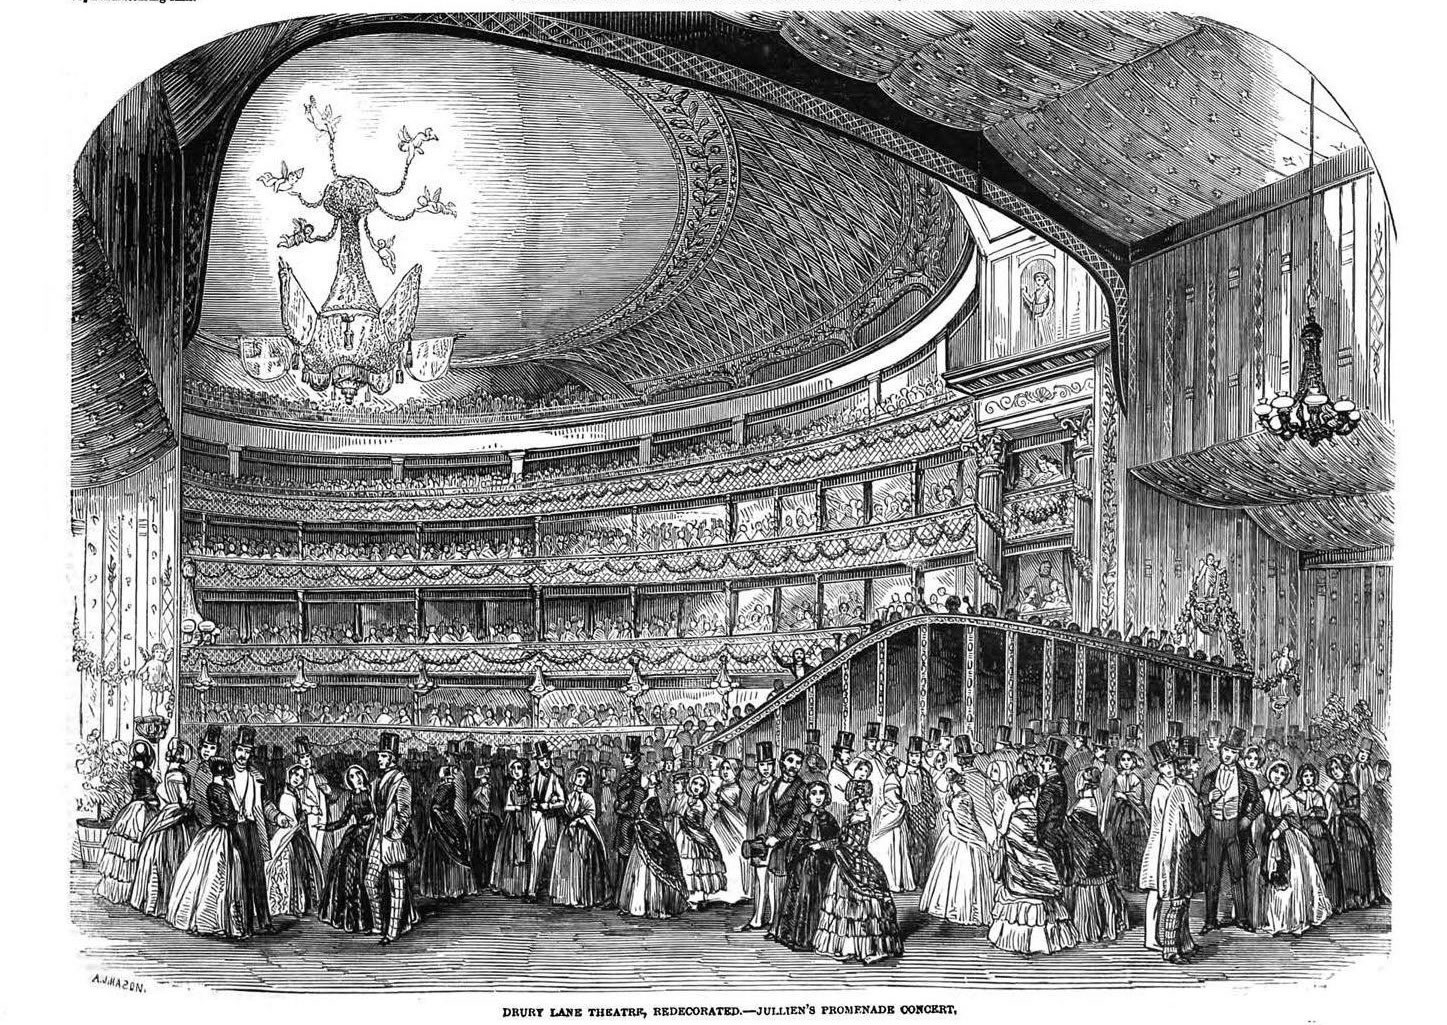 Celebrity French conductor Louis Jullien's Prom Concert from TheGenealogist's Newspapers & Magazines:
		Illustrated London News October 16 1847